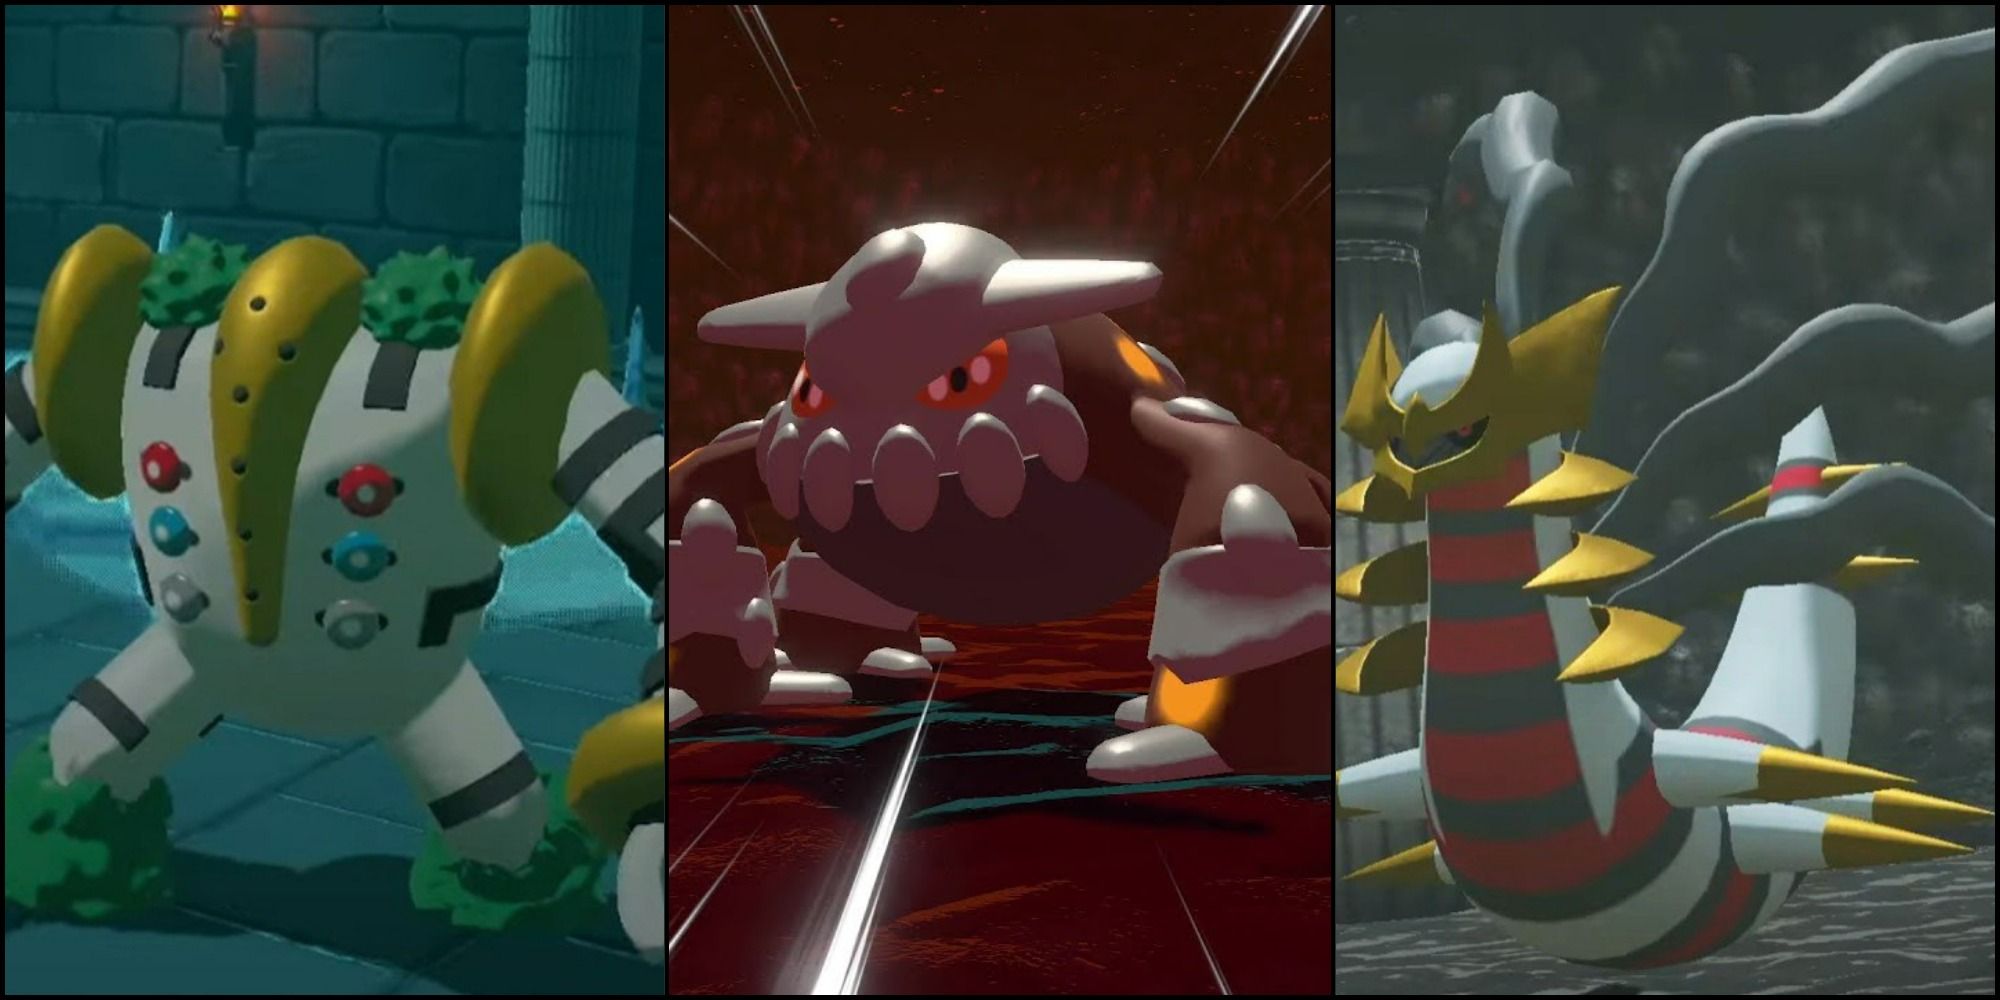 A split image for Pokemon Legends Arceus featuring Regigigas to the left, Heatran in the middle and Giratina to the right